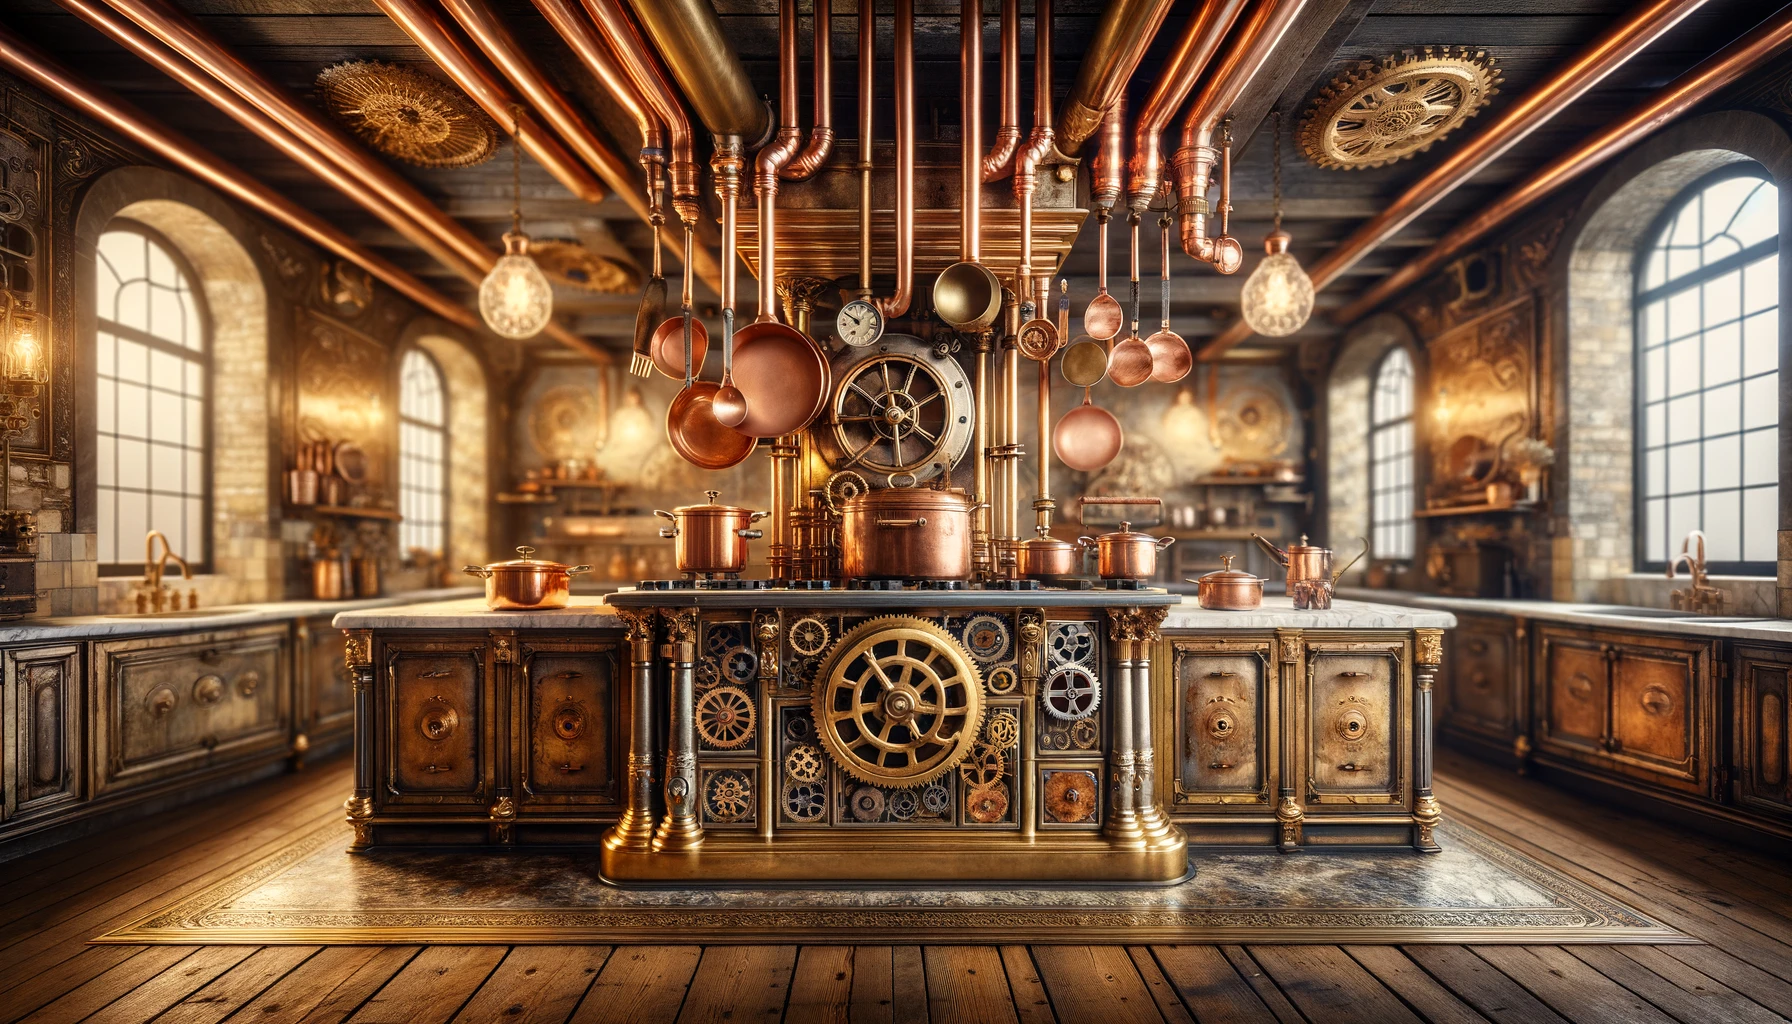 Steampunk-style kitchen with copper utensils and pipes.